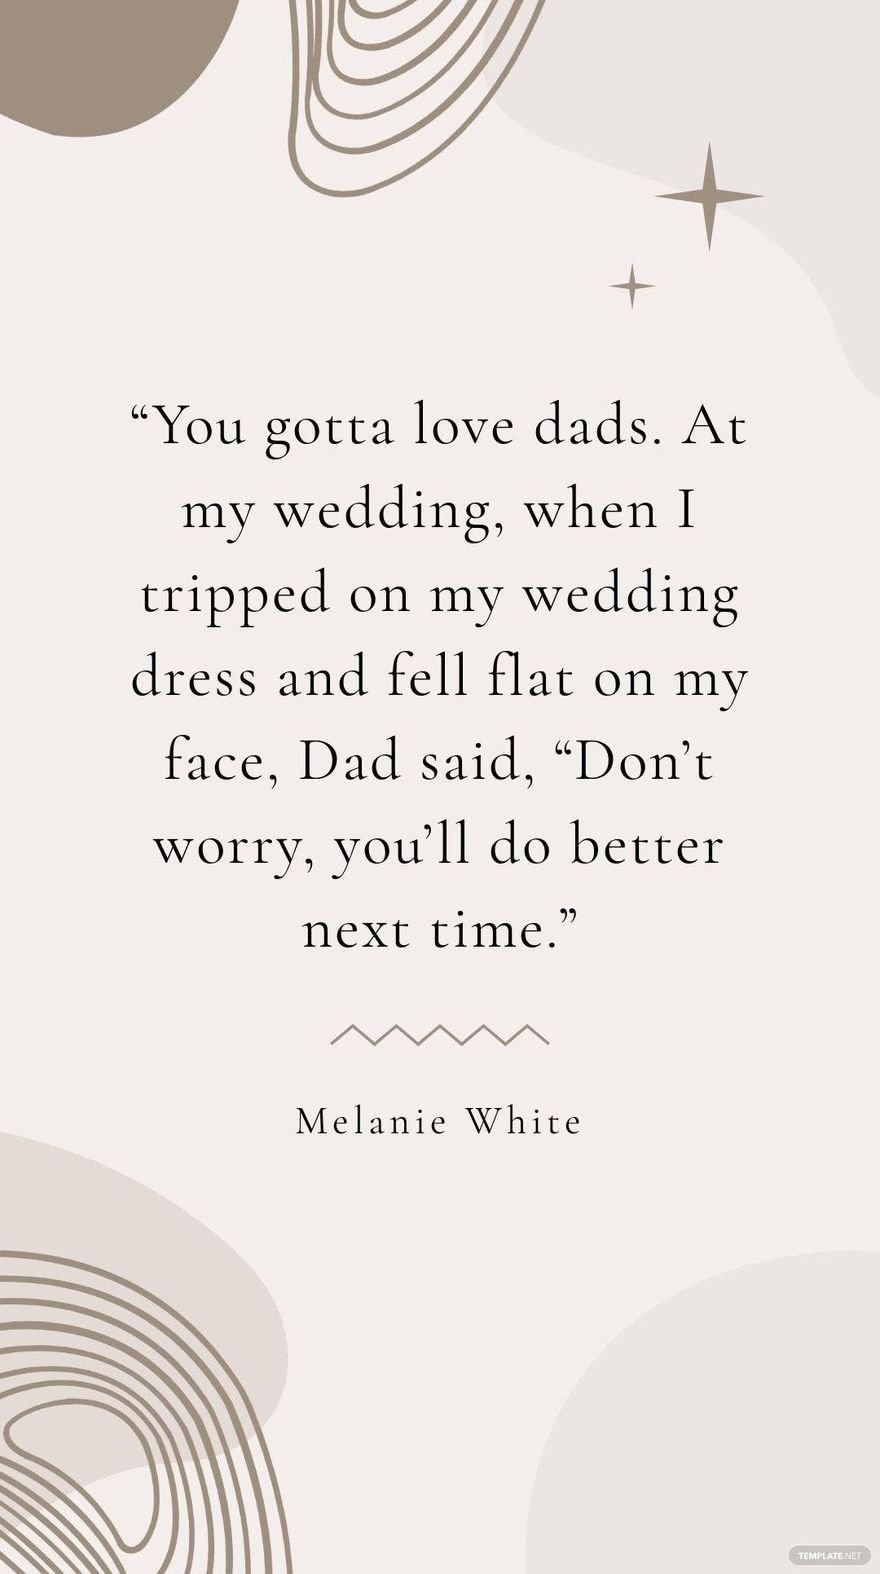 Melanie White - “You gotta love dads. At my wedding, when I tripped on my wedding dress and fell flat on my face, Dad said, “Don’t worry, you’ll do better next time.”